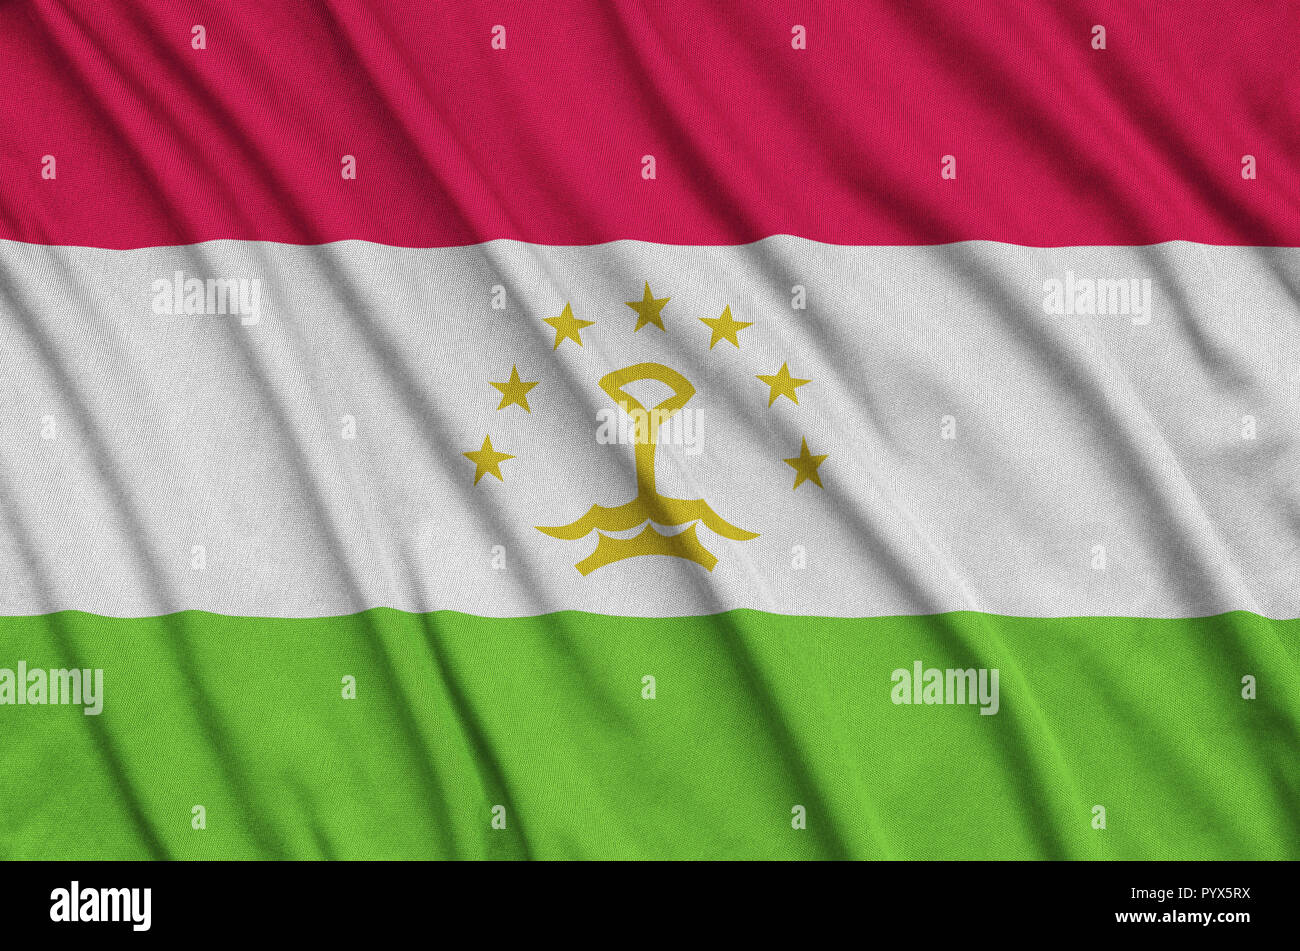 Tajikistan flag  is depicted on a sports cloth fabric with many folds. Sport team waving banner Stock Photo